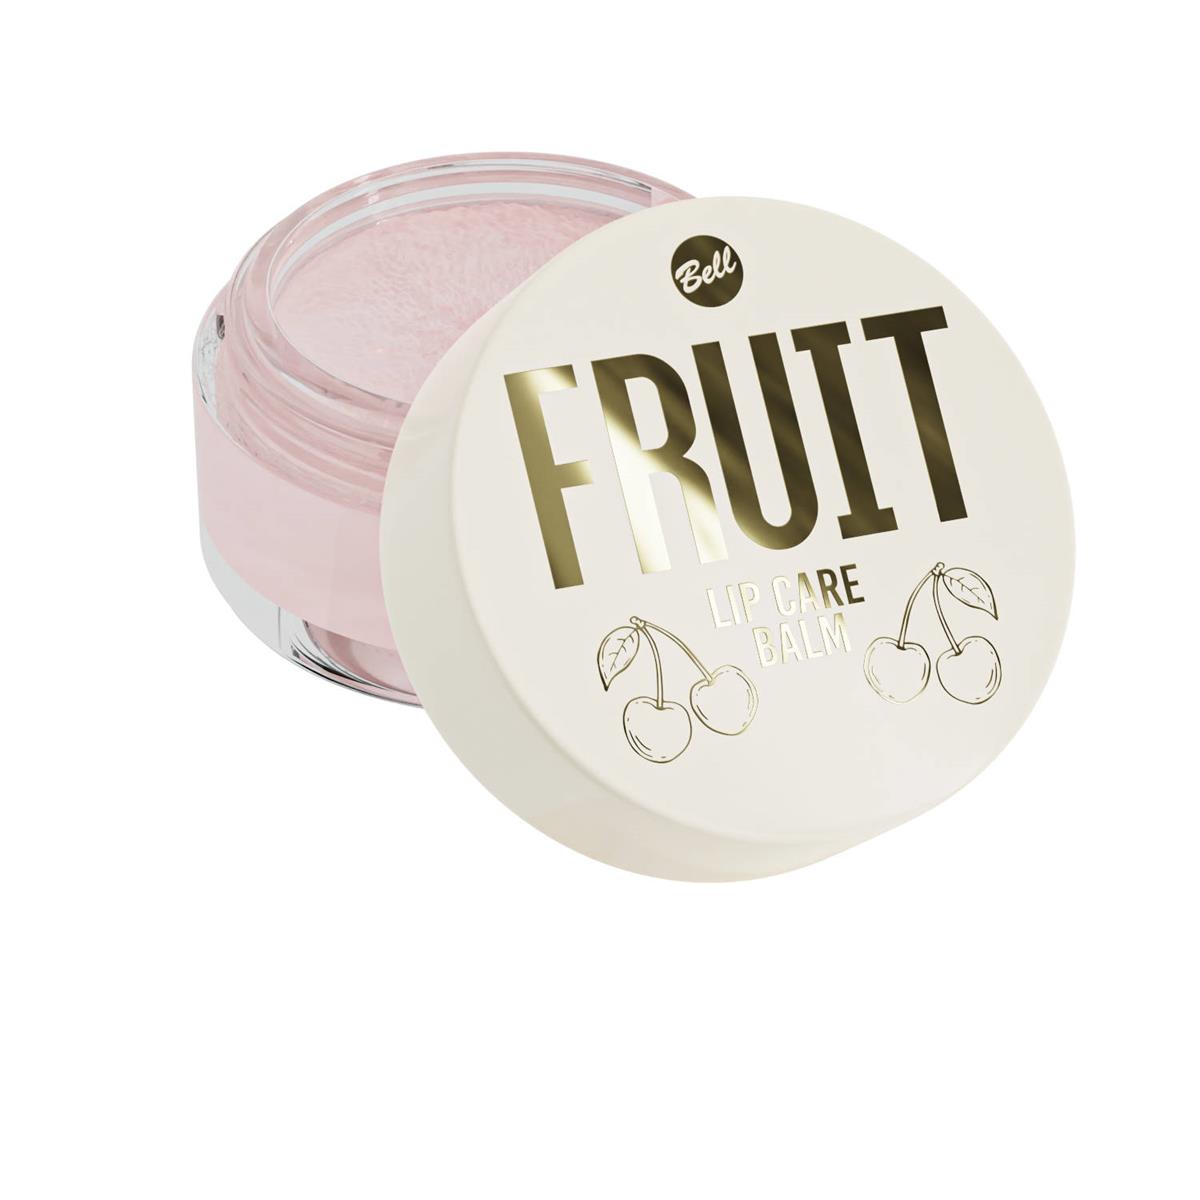 Bell Wiśniowy Balsam Do Ust Extra 1 2023 Fruit Lip Care Balm 001, 5g